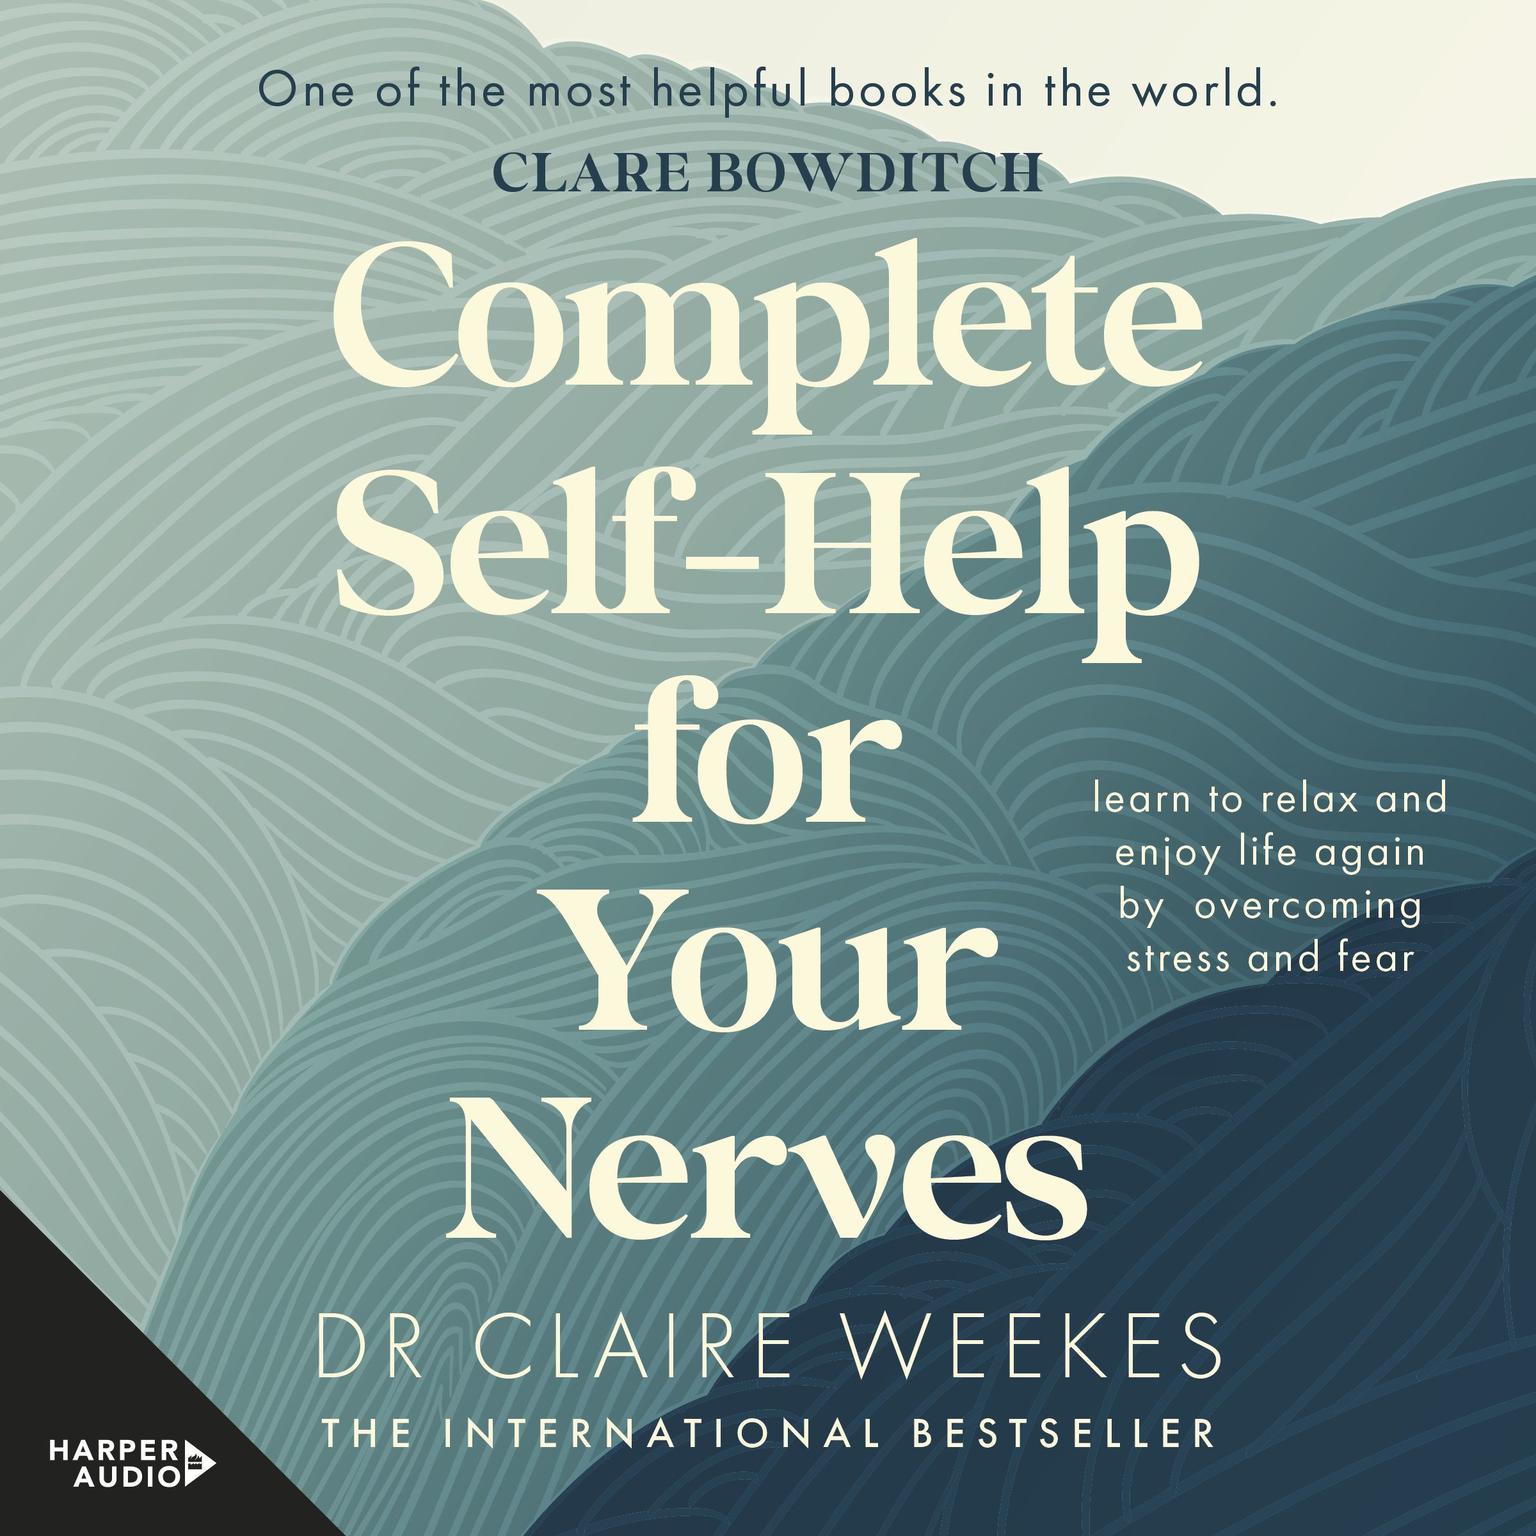 Complete Self-Help for Your Nerves: The practical guide to overcoming stress and anxiety from the popular bestselling author for readers of Dr Julie Smith, Gabor Mate and Matt Haig Audiobook, by Dr. Claire Weekes